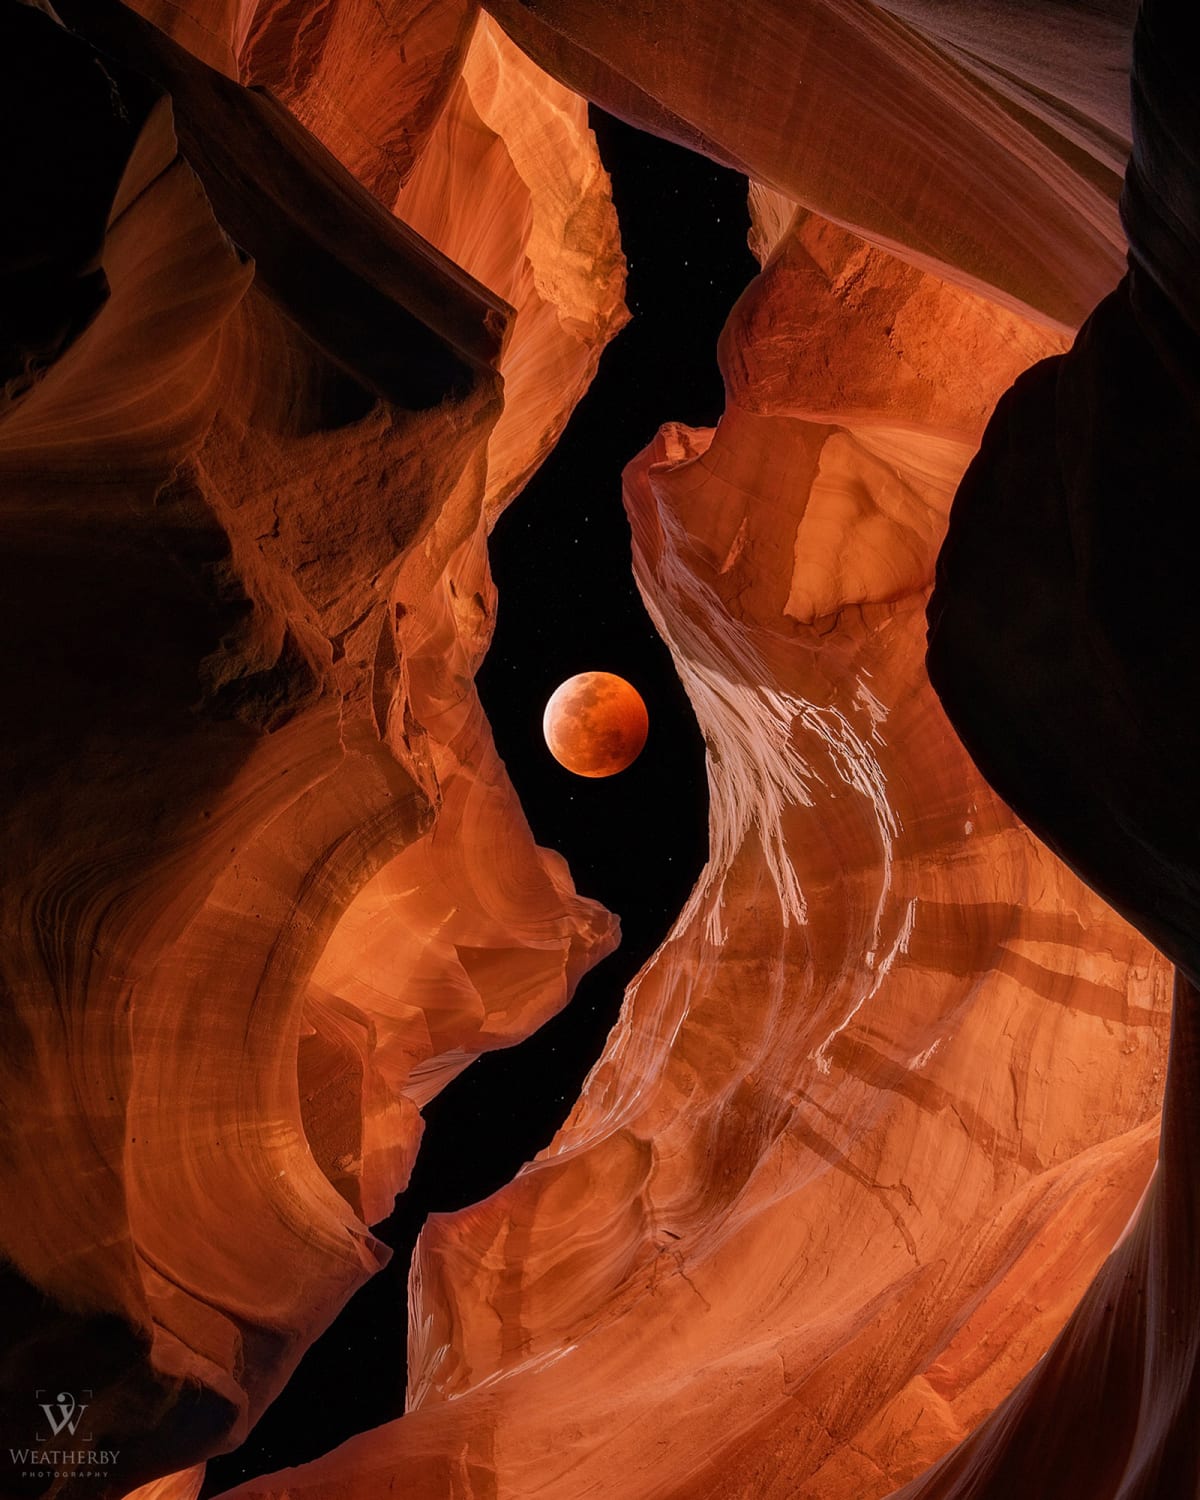 Bloodmoon Canyon - Original composited Lunar Eclipse and Slot Canyon - (Shared earlier without Cred) Original Artist IG: @whereisweatherby